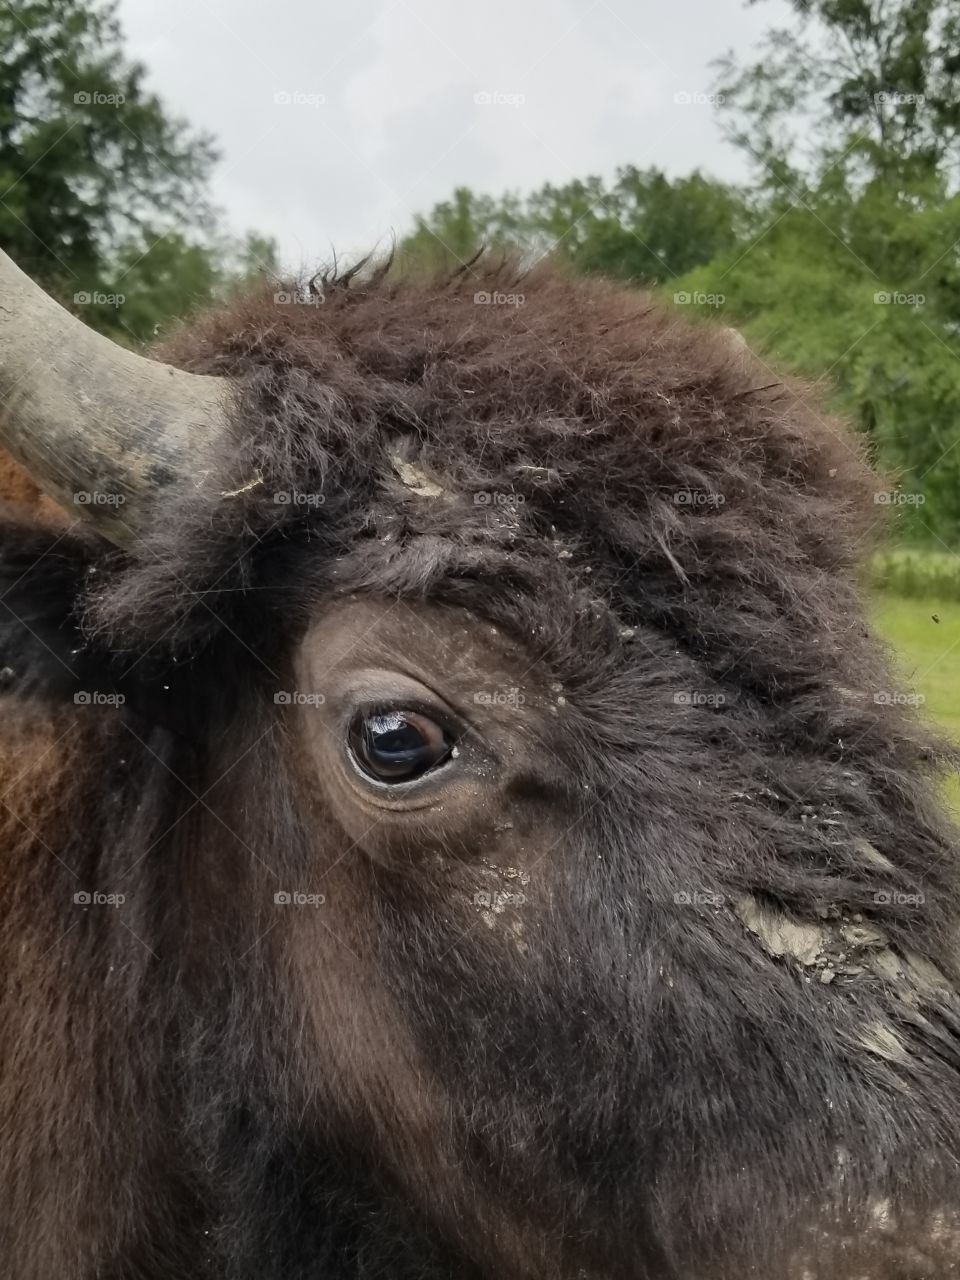 Up close to a bison!